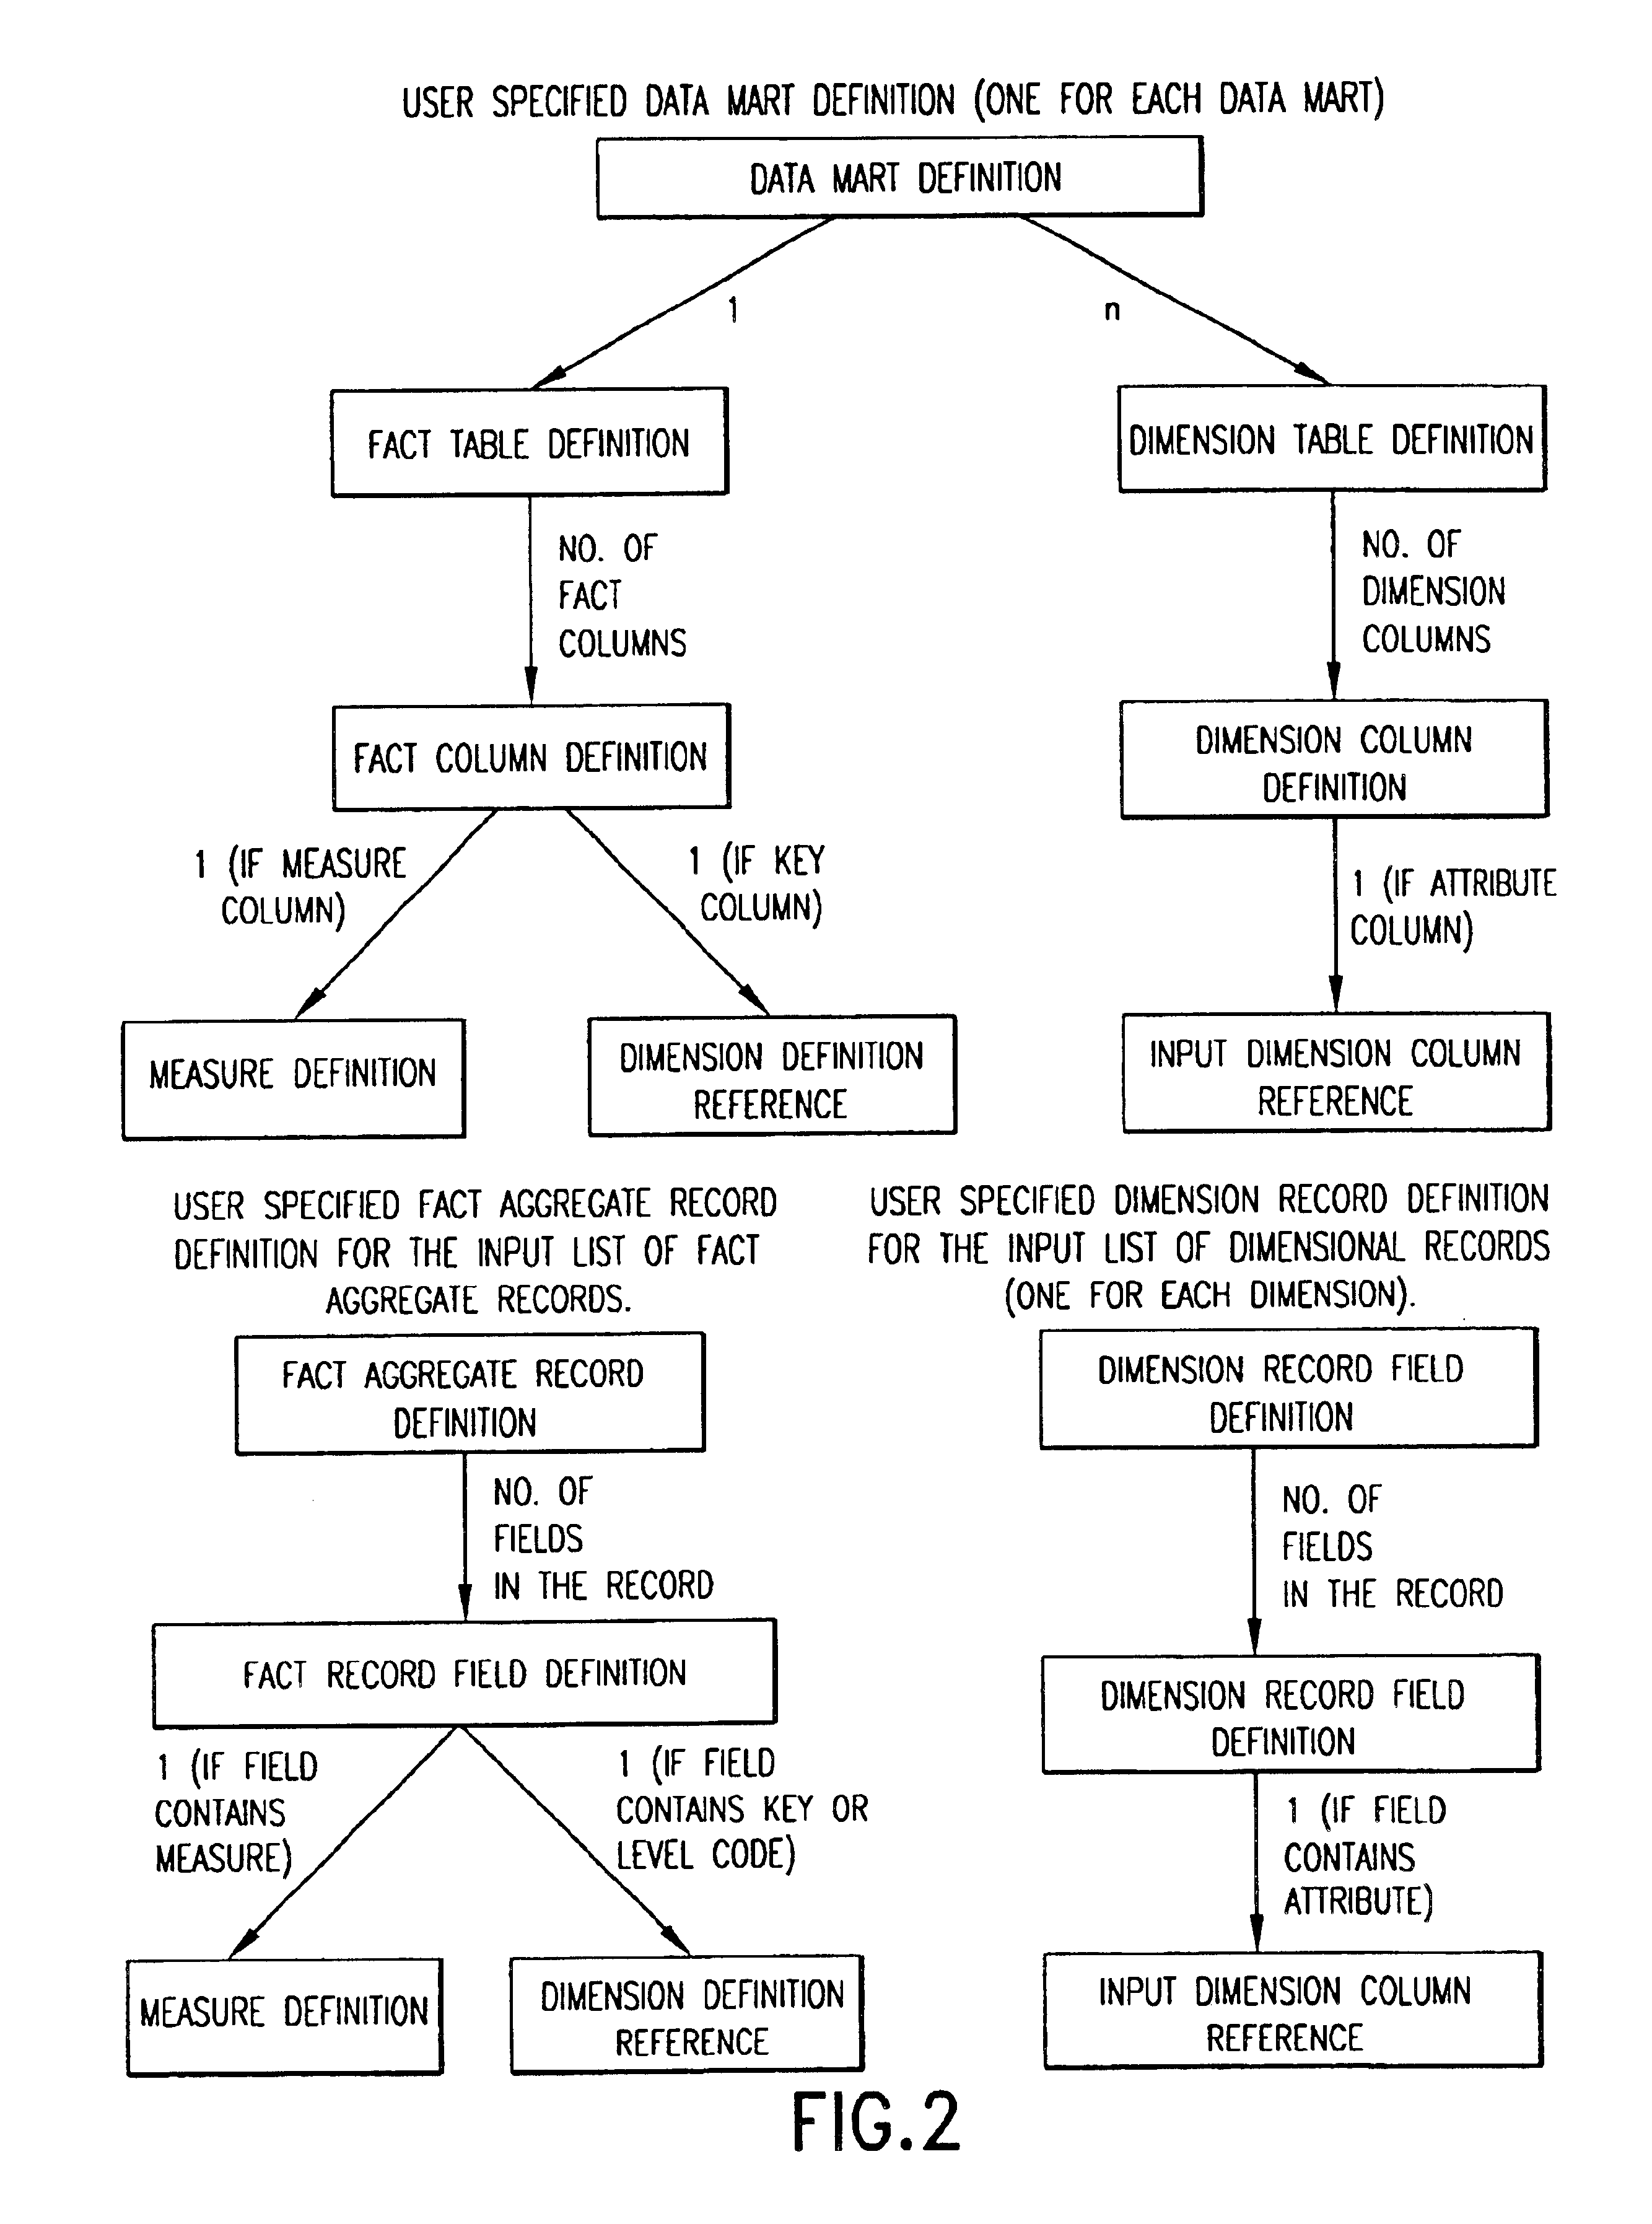 Method and apparatus for populating multiple data marts in a single aggregation process